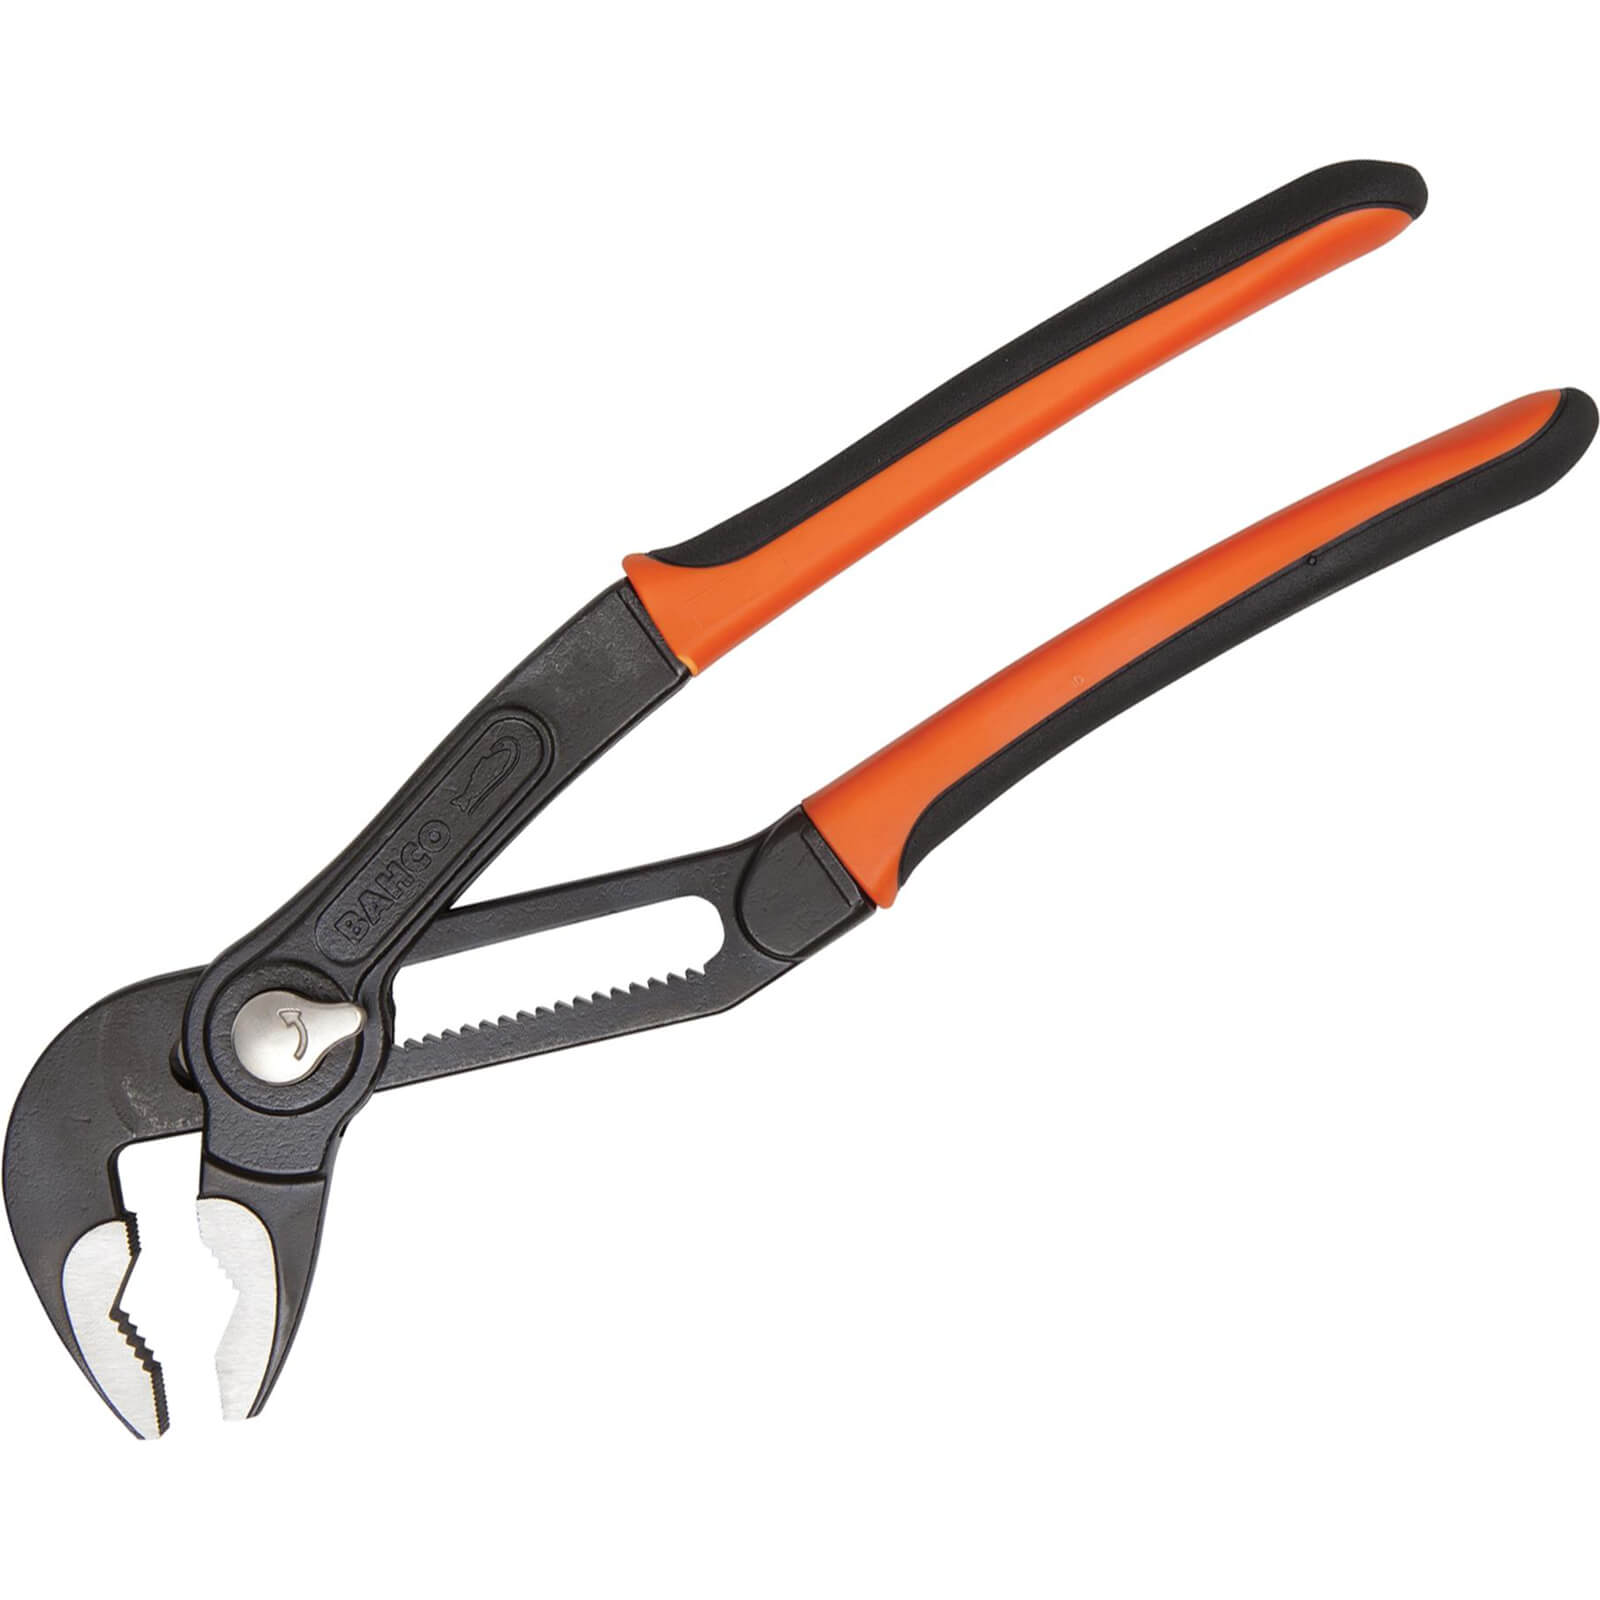 Photo of Bahco 7223 Quick Adjust Slip Joint Pliers 300mm